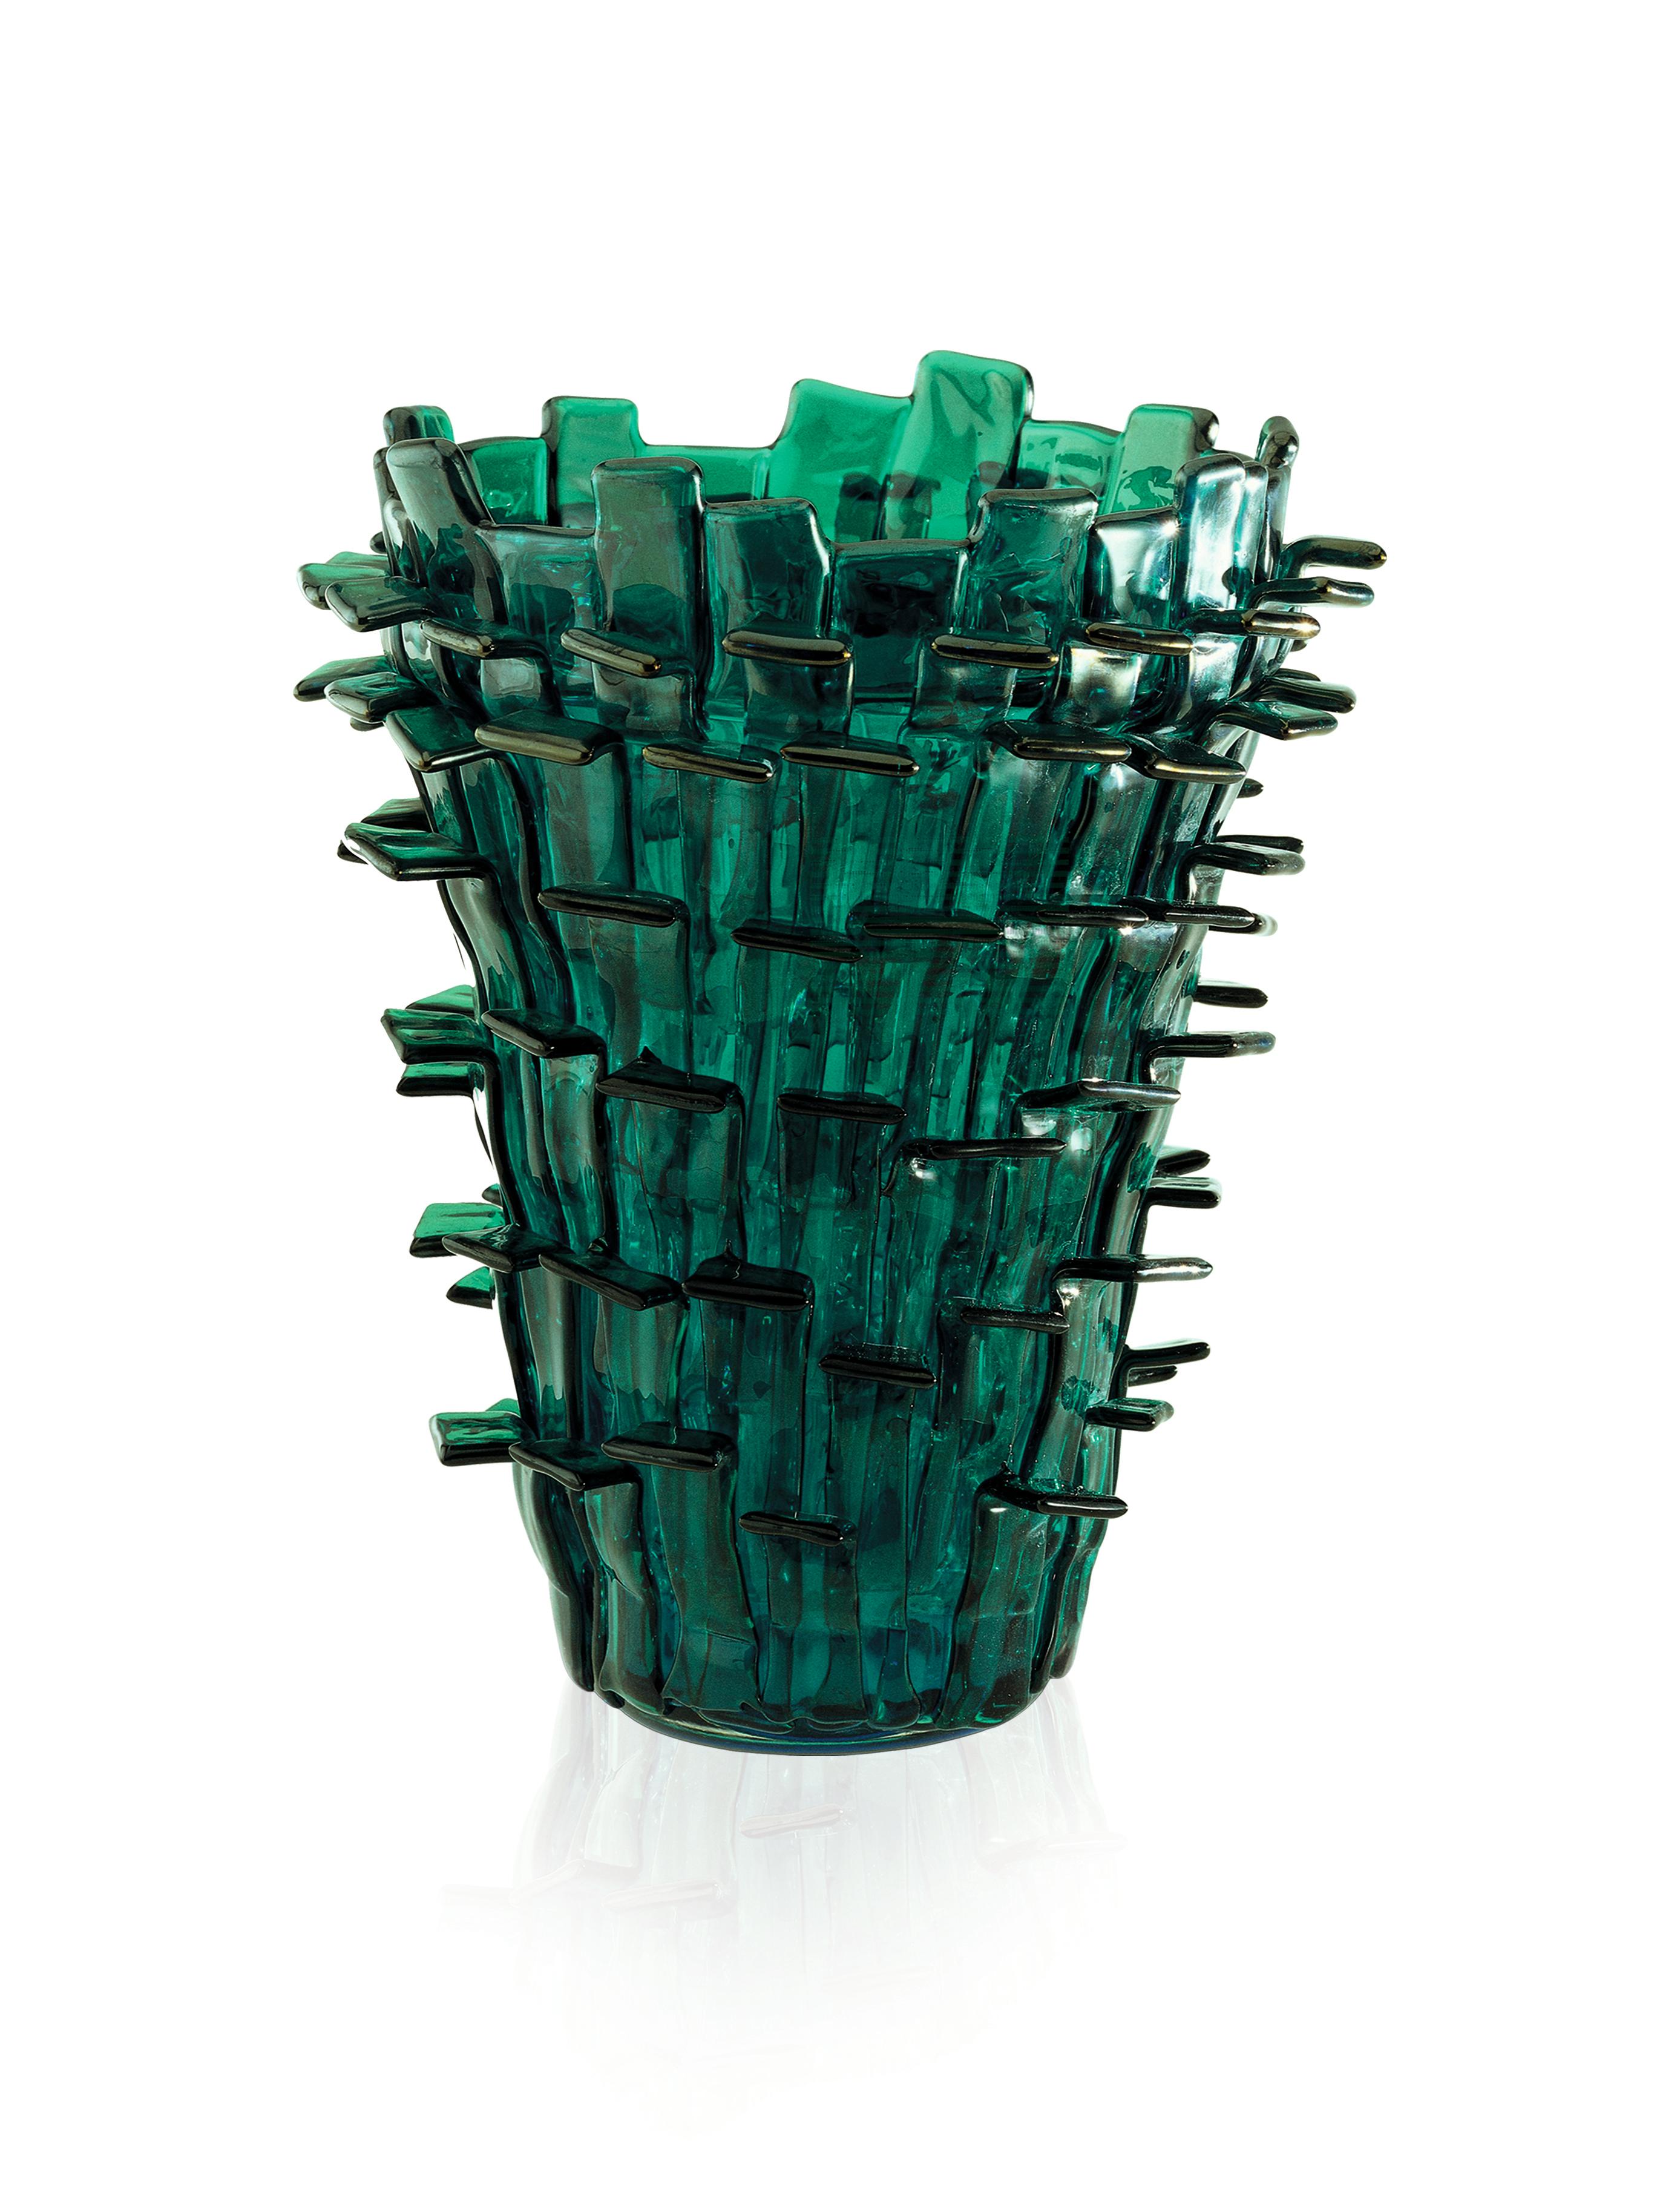 Venini glass vase in iridescent green and aquamarine designed by Fulvio Bianconi in 1989. Perfect for indoor home decor as a flower vase or statement piece for any room. Numbered edition for year.

Dimensions: 22 cm diameter x 30 cm height.